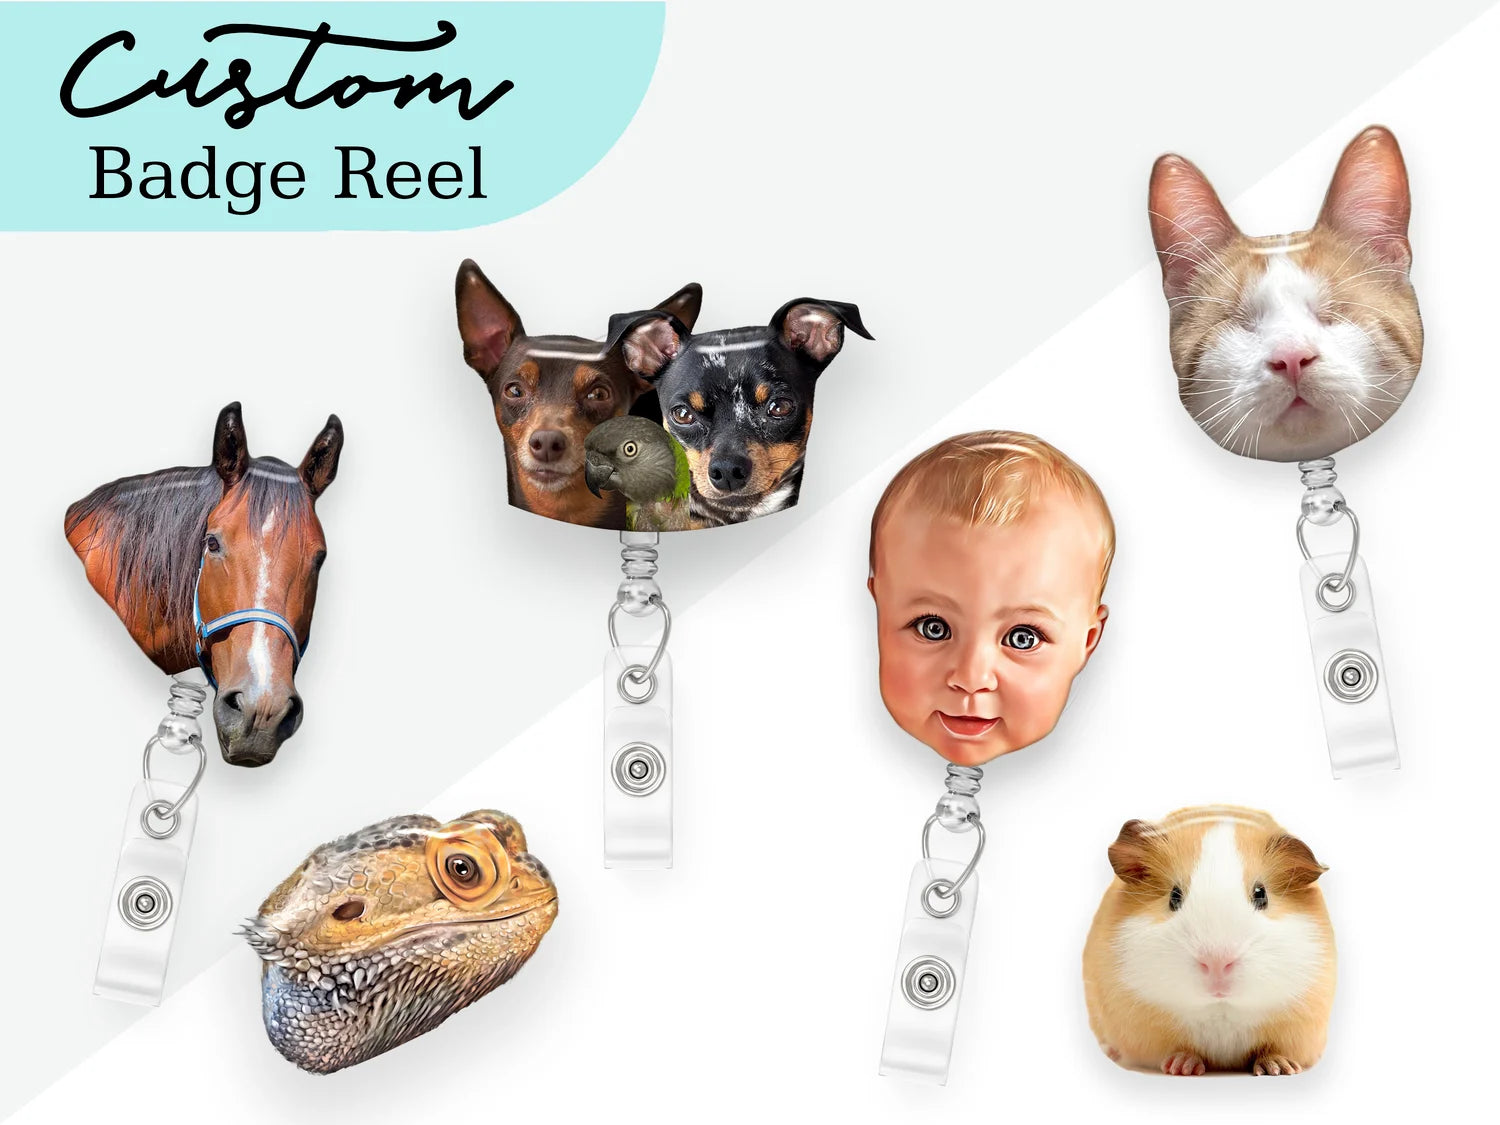 Your pet on a badge reel – Awe Snap